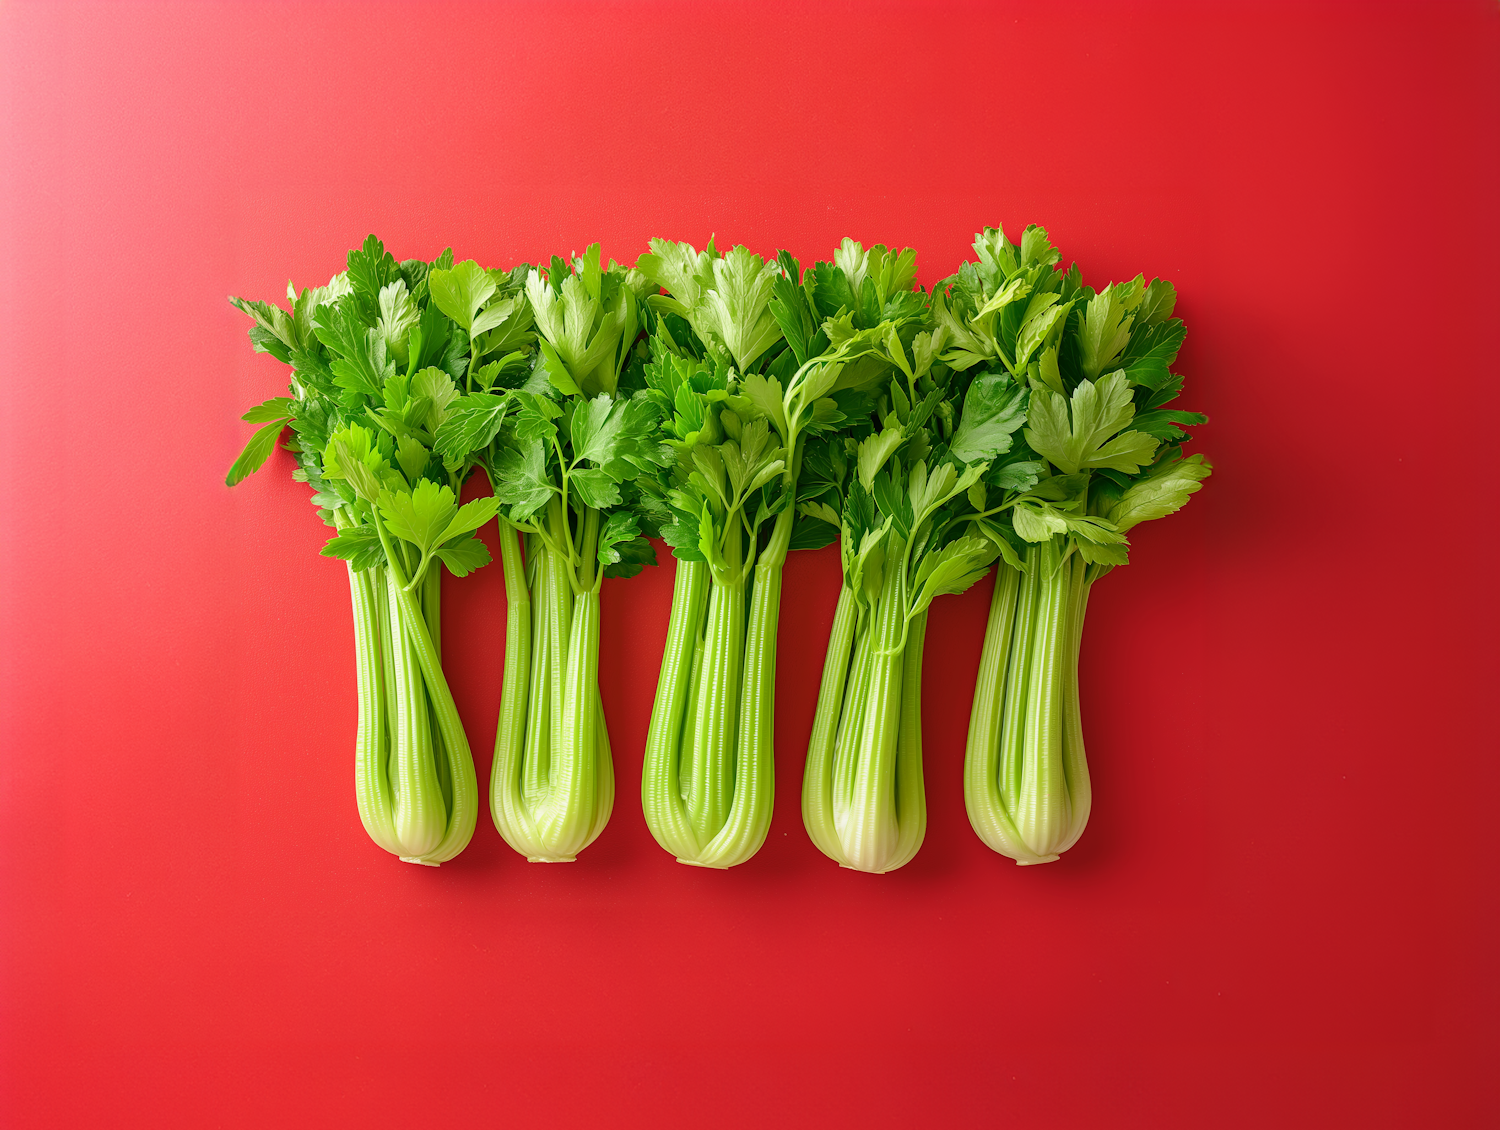 Vibrant Celery on Red Background